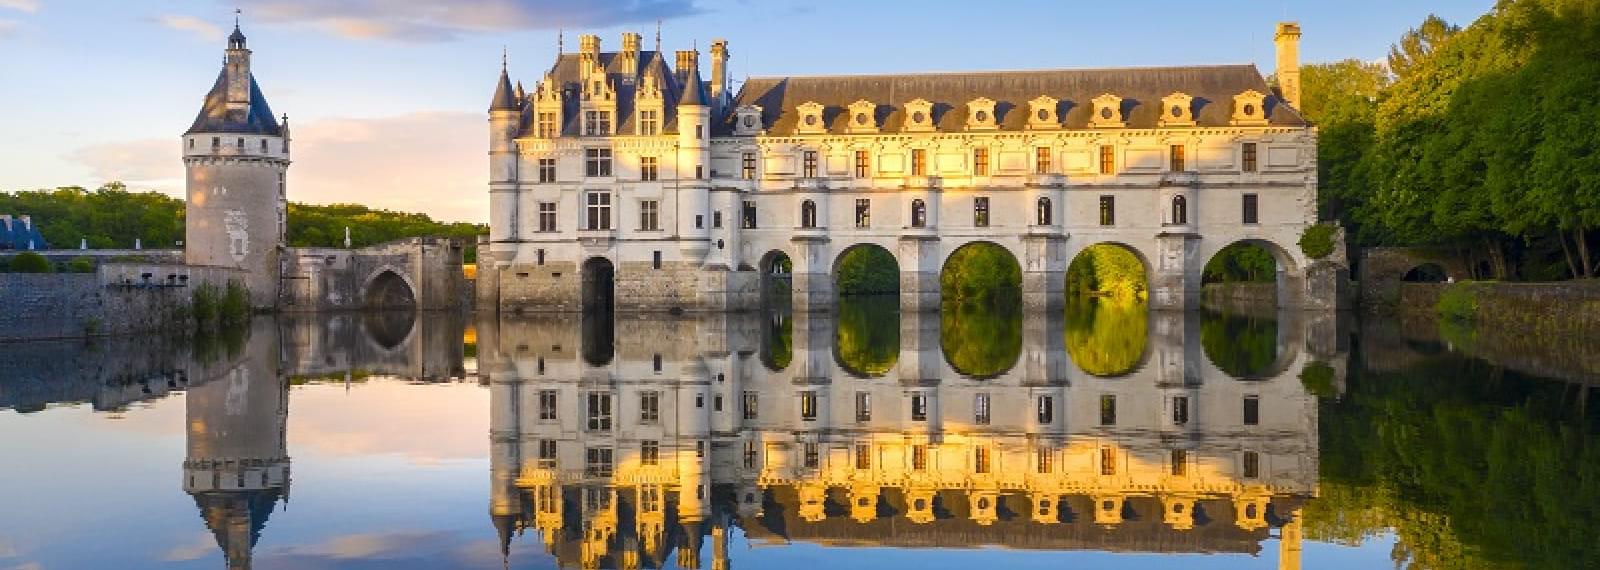 The Château de Chenonceau is a magnificent French château spanning the river Cher